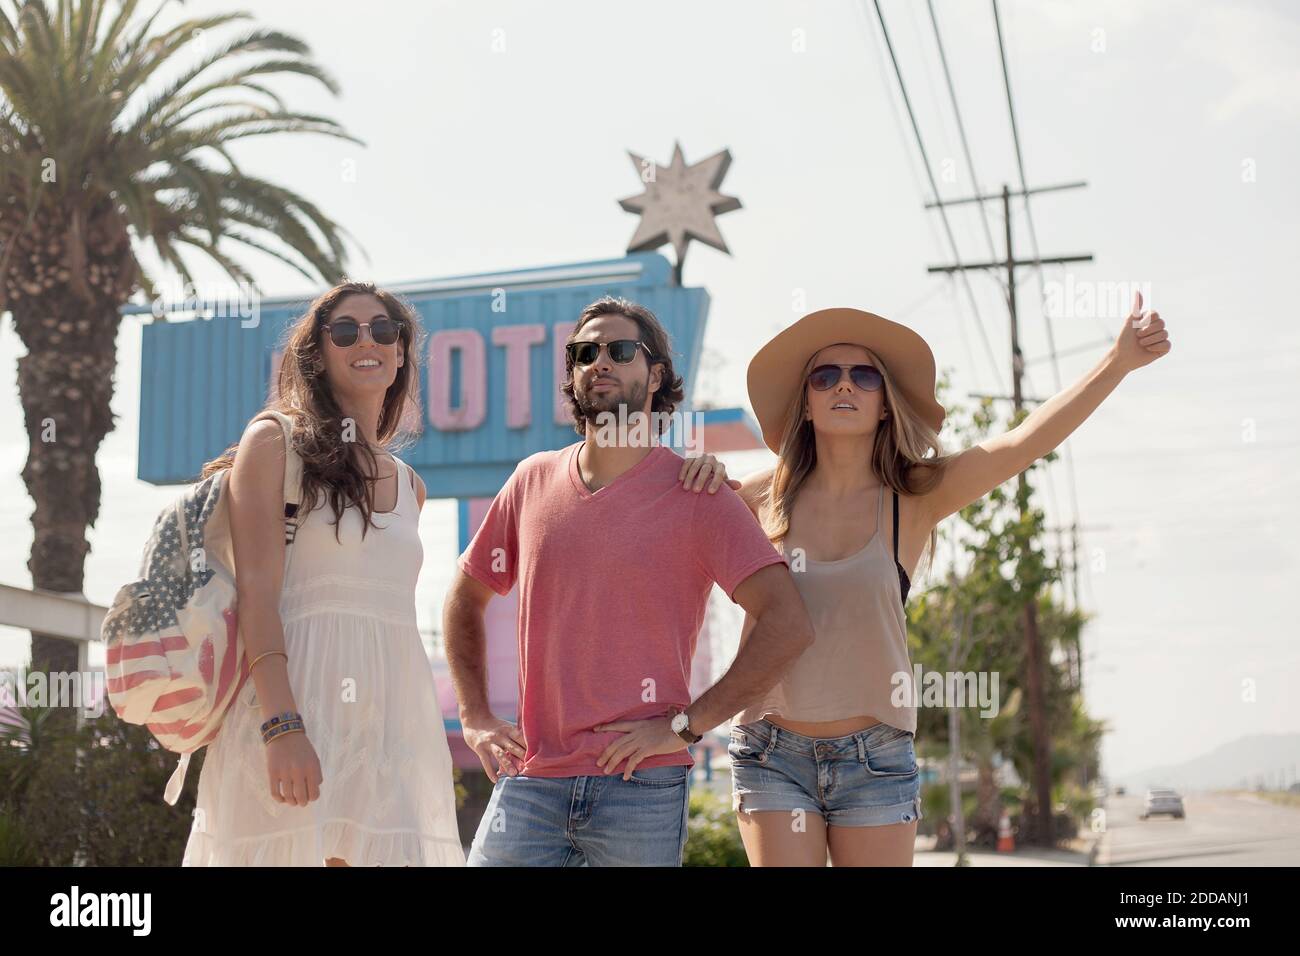 Male and female friends in sunglasses hailing a ride during sunny day Stock Photo